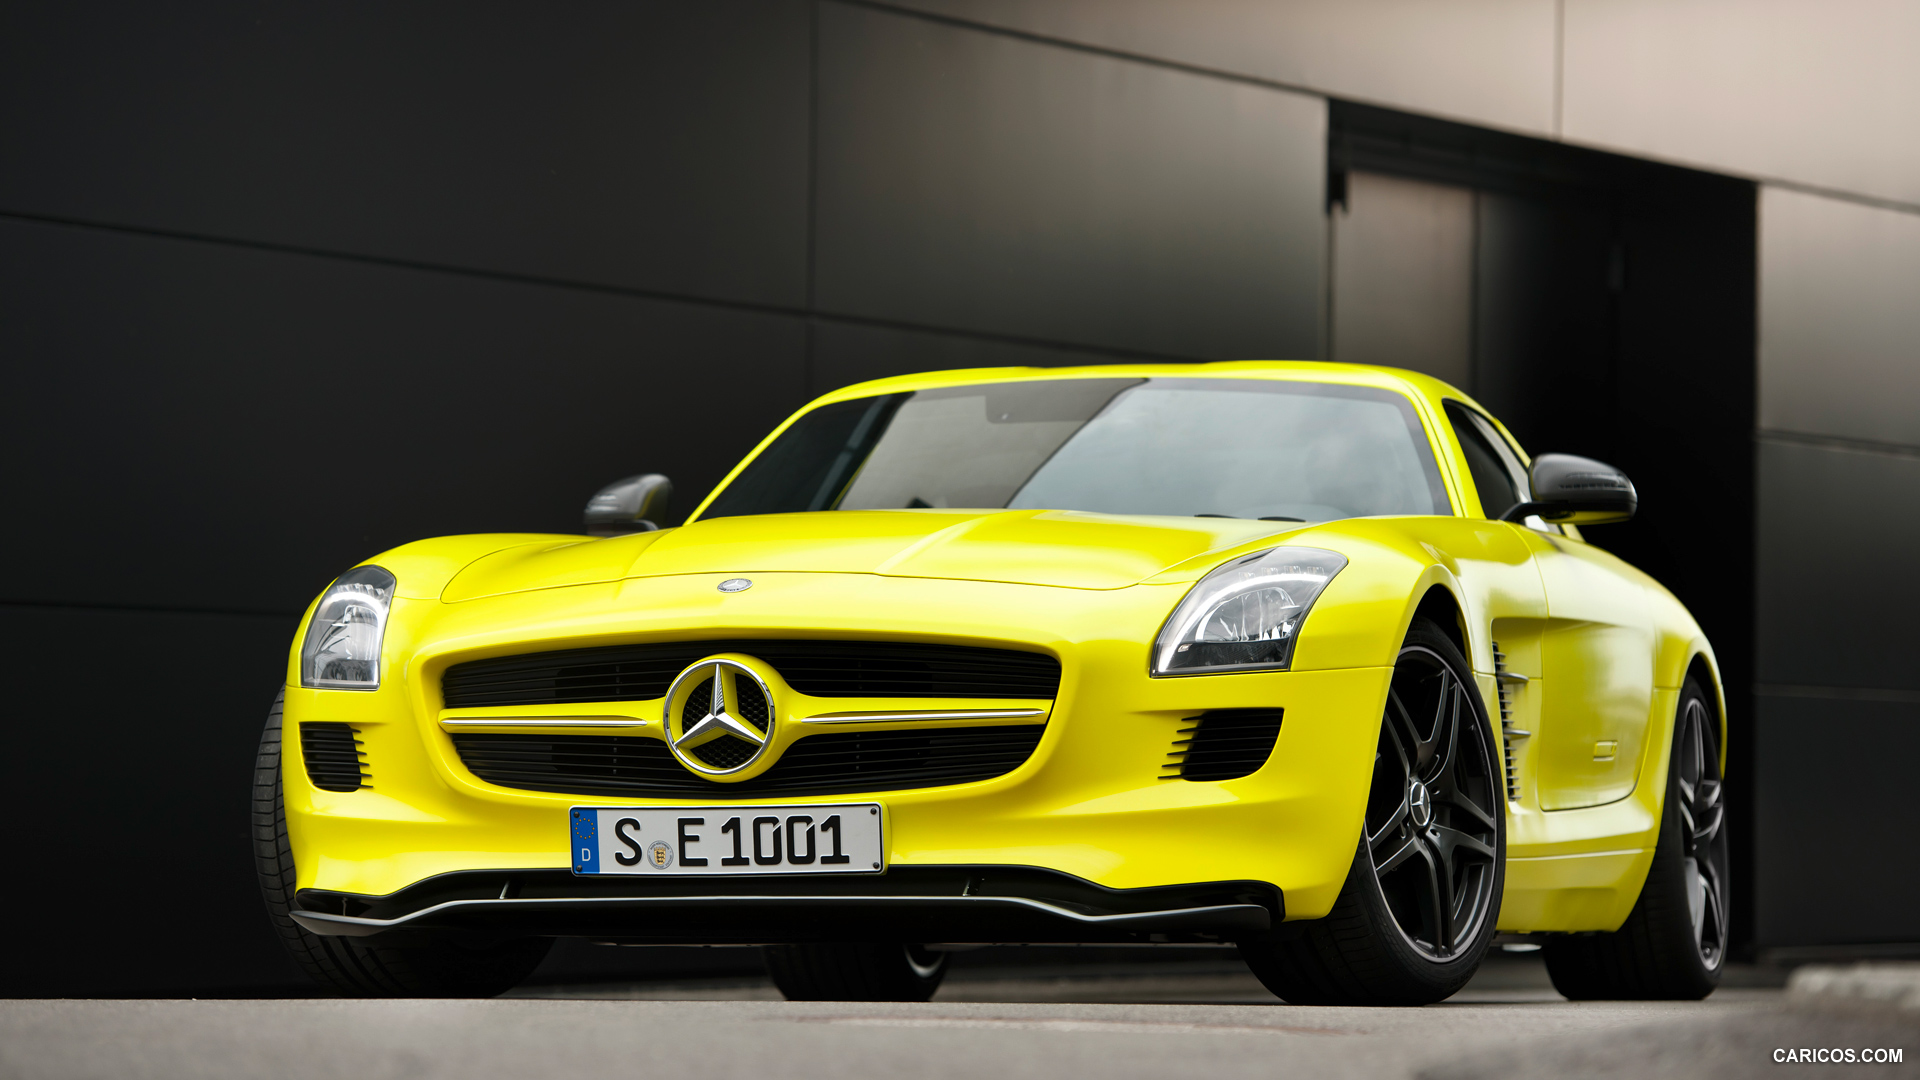 Mercedes-Benz SLS AMG E-CELL Concept  - Front, #45 of 60